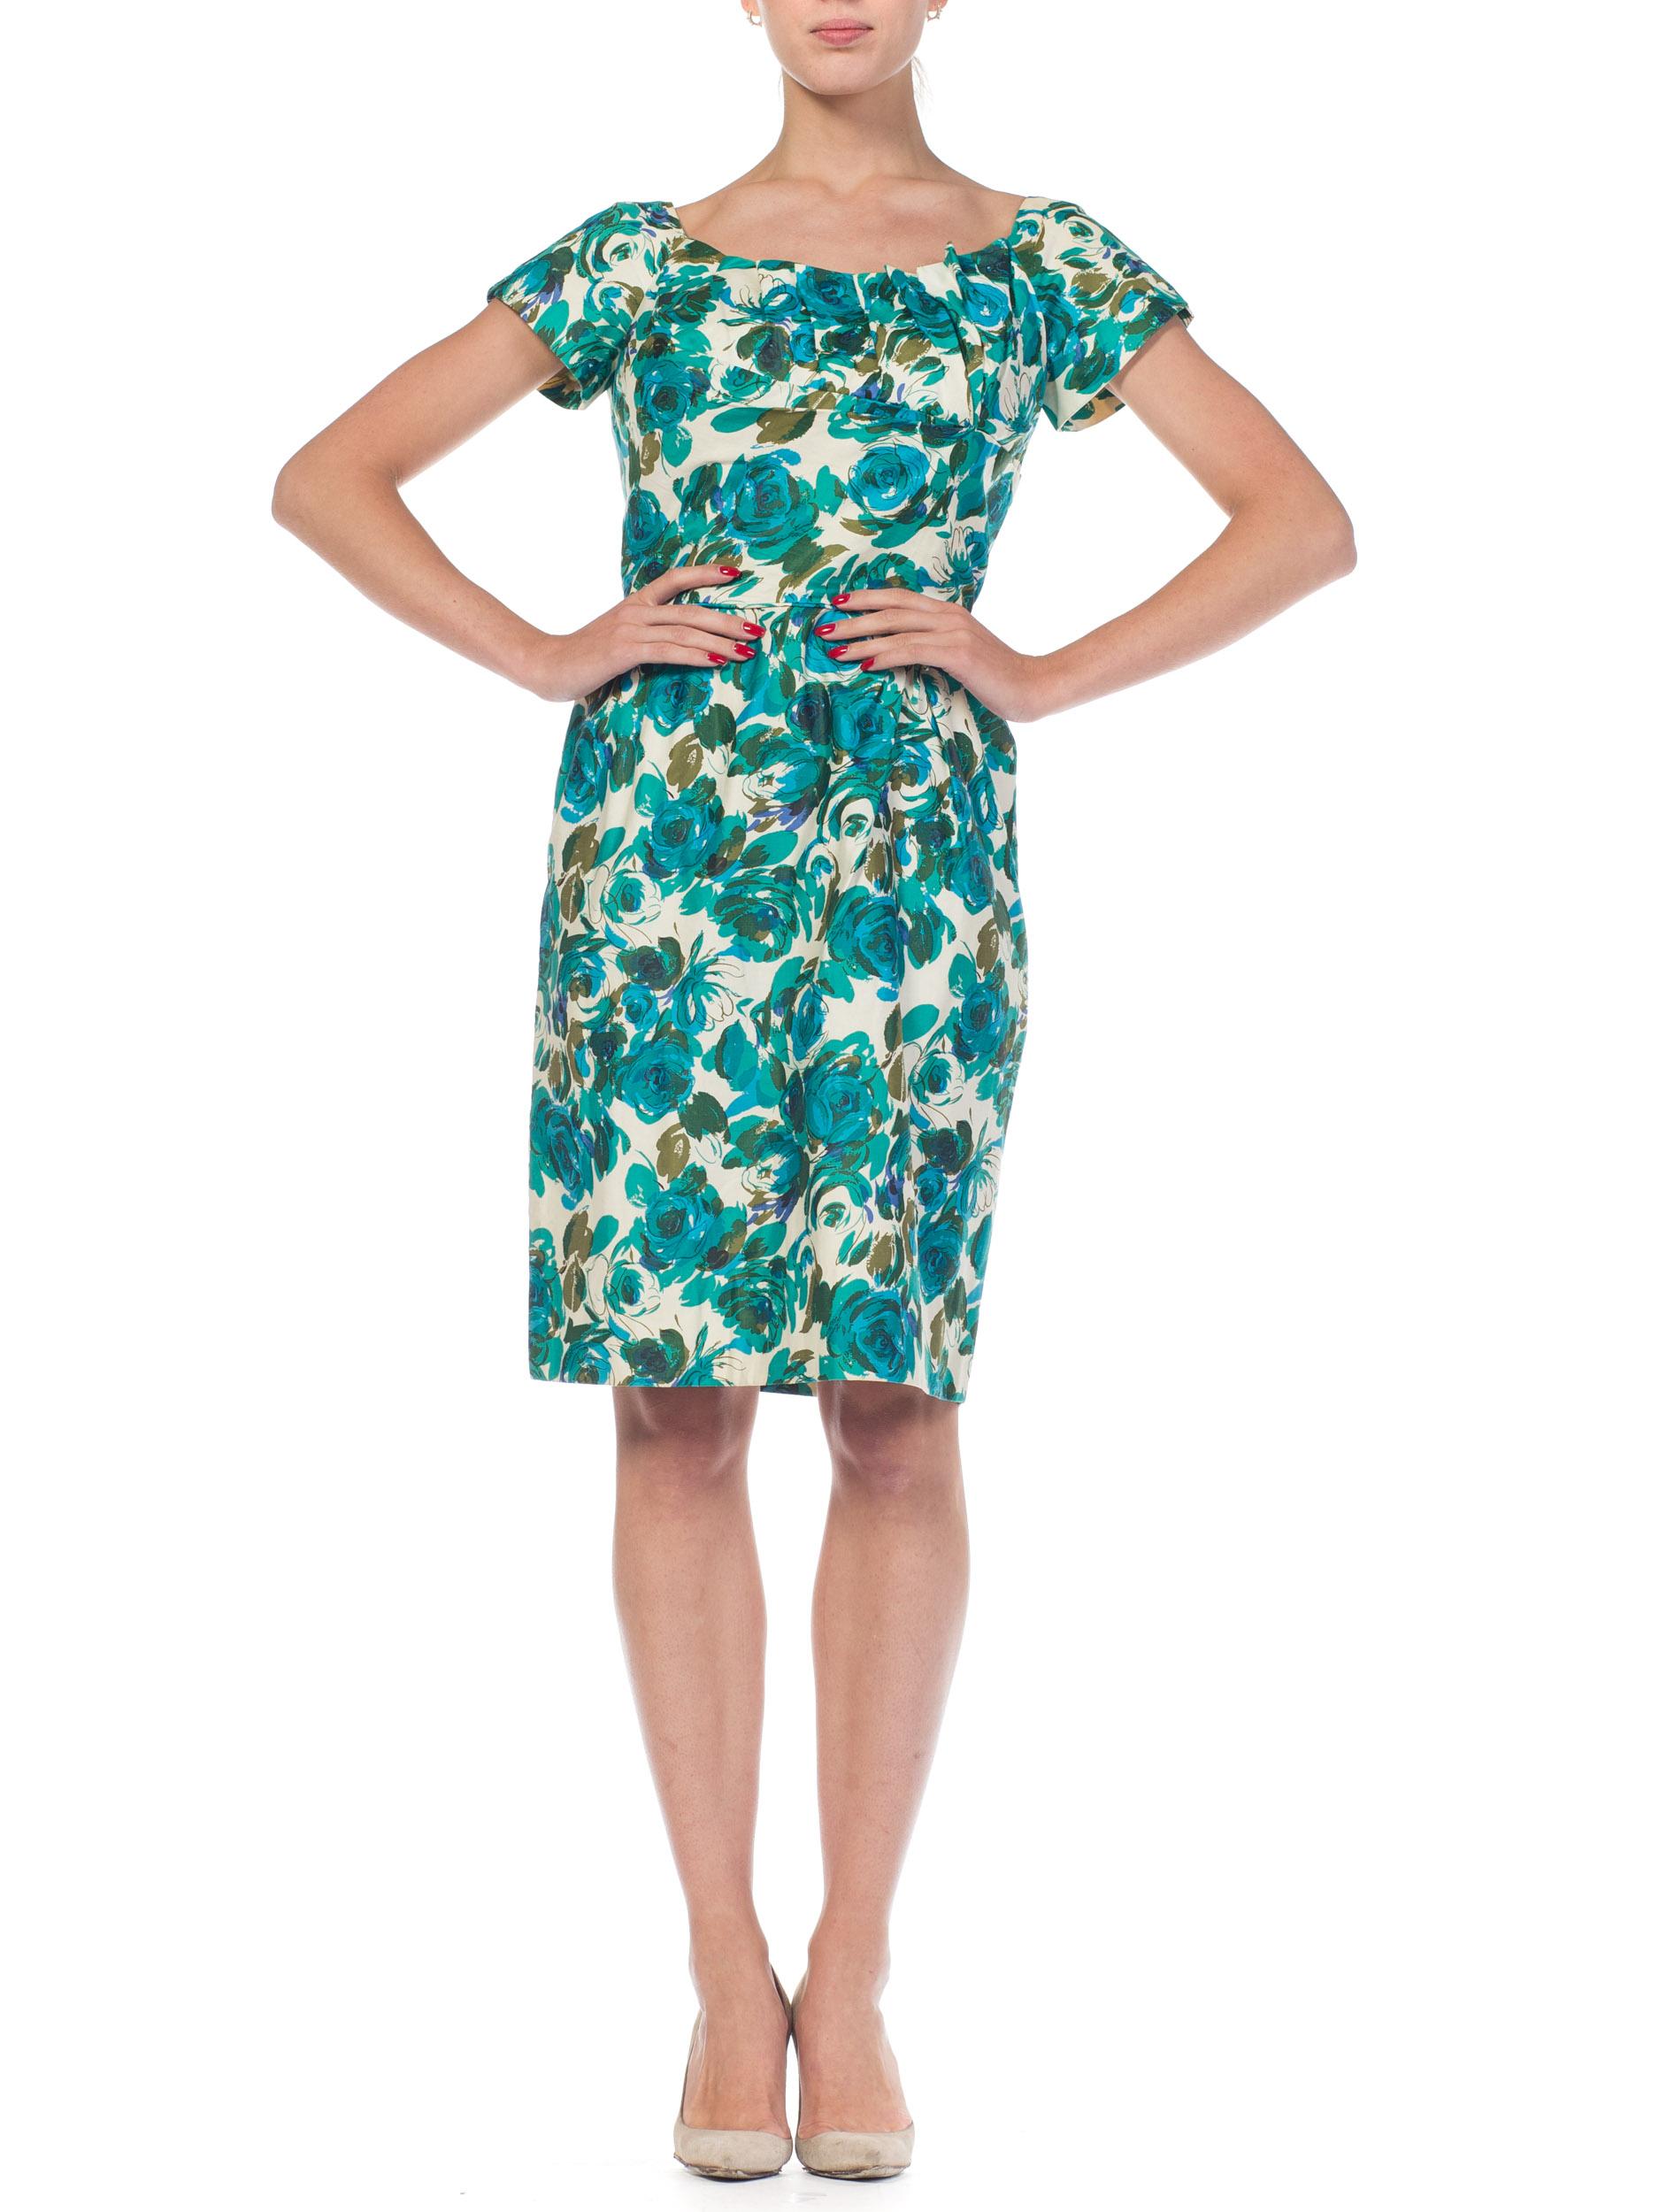 1950S Teal Floral Print Cotton Draped Bodice Dress With Cap Sleeves In Excellent Condition For Sale In New York, NY